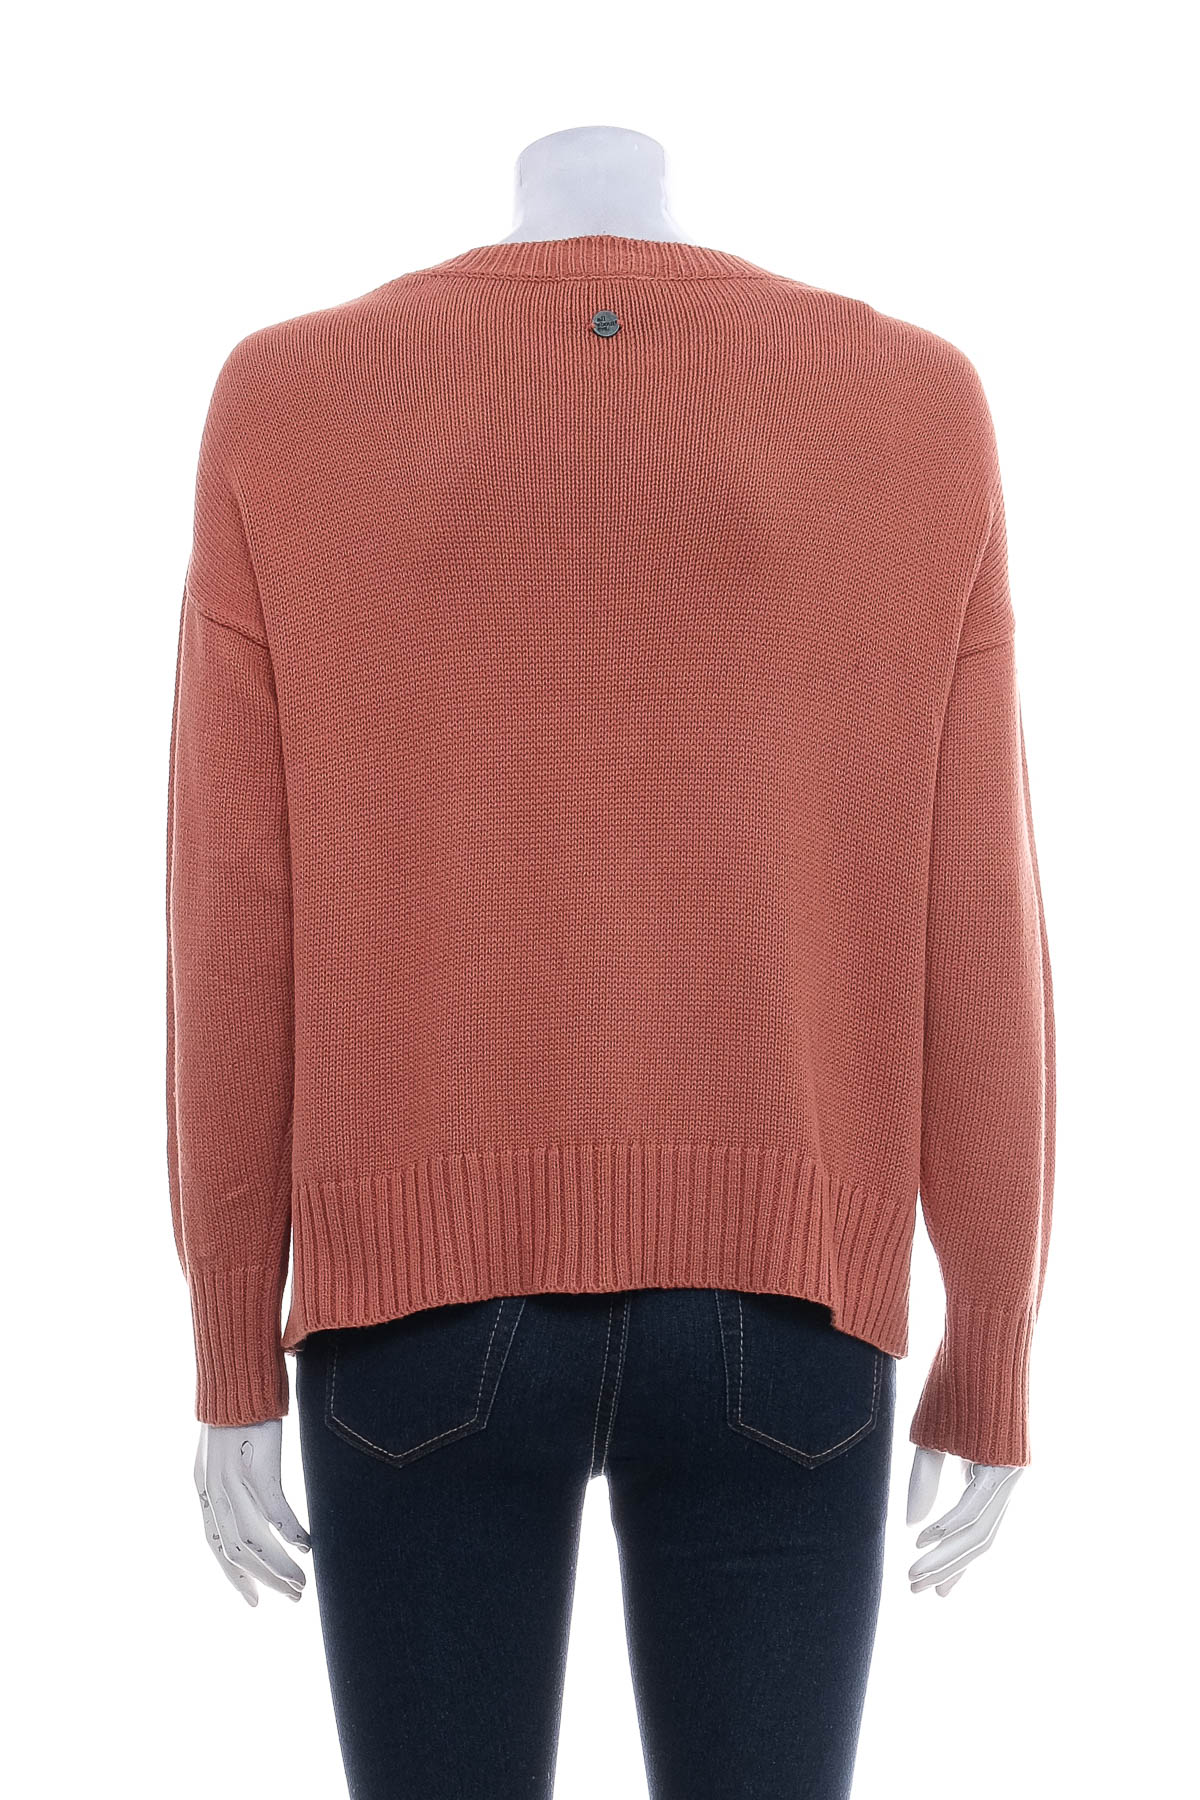 Women's sweater - All about eve. - 1